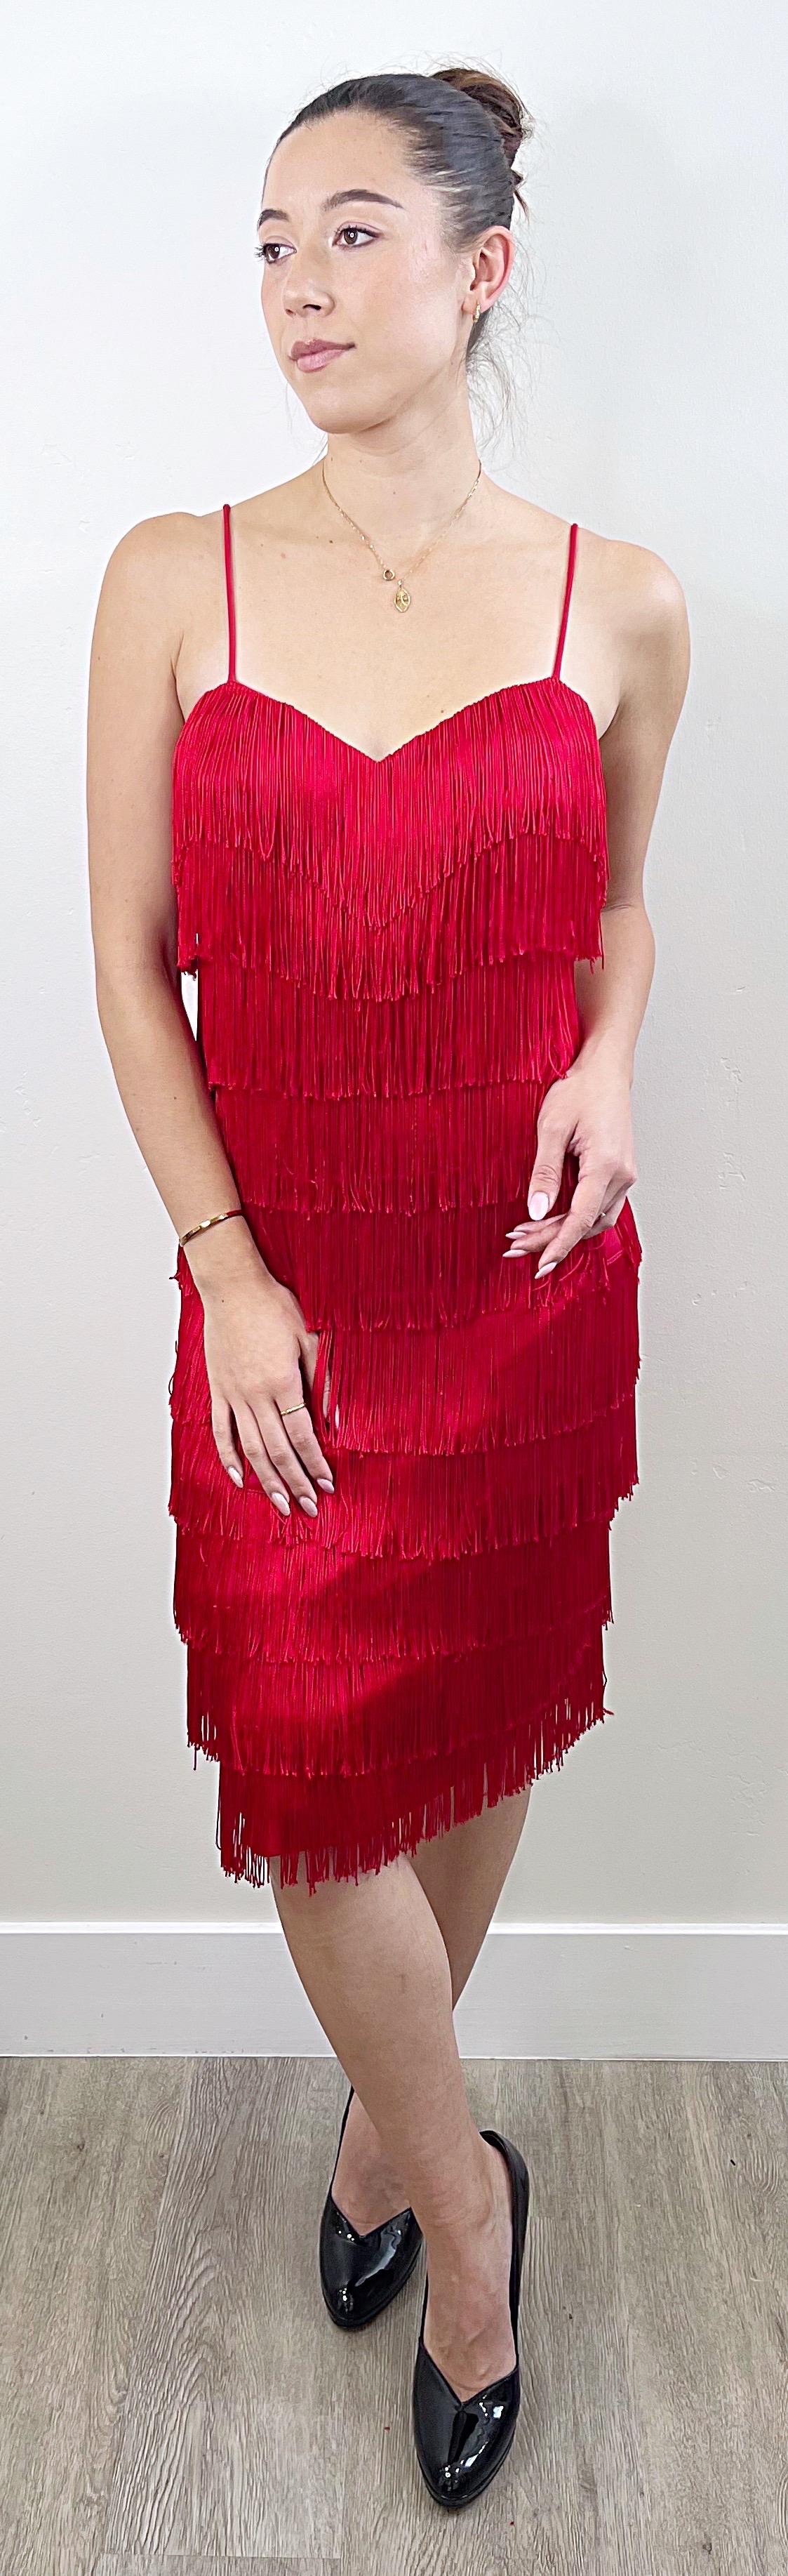 Incredible early 1980s does 1920s lipstick / cherry red fully fringed flapper style sleeveless dress ! Features nine tiers of fringe throughout the entire dress. Hidden zipper up the back. Stretch jersey stretches to fit.
Great for any day or